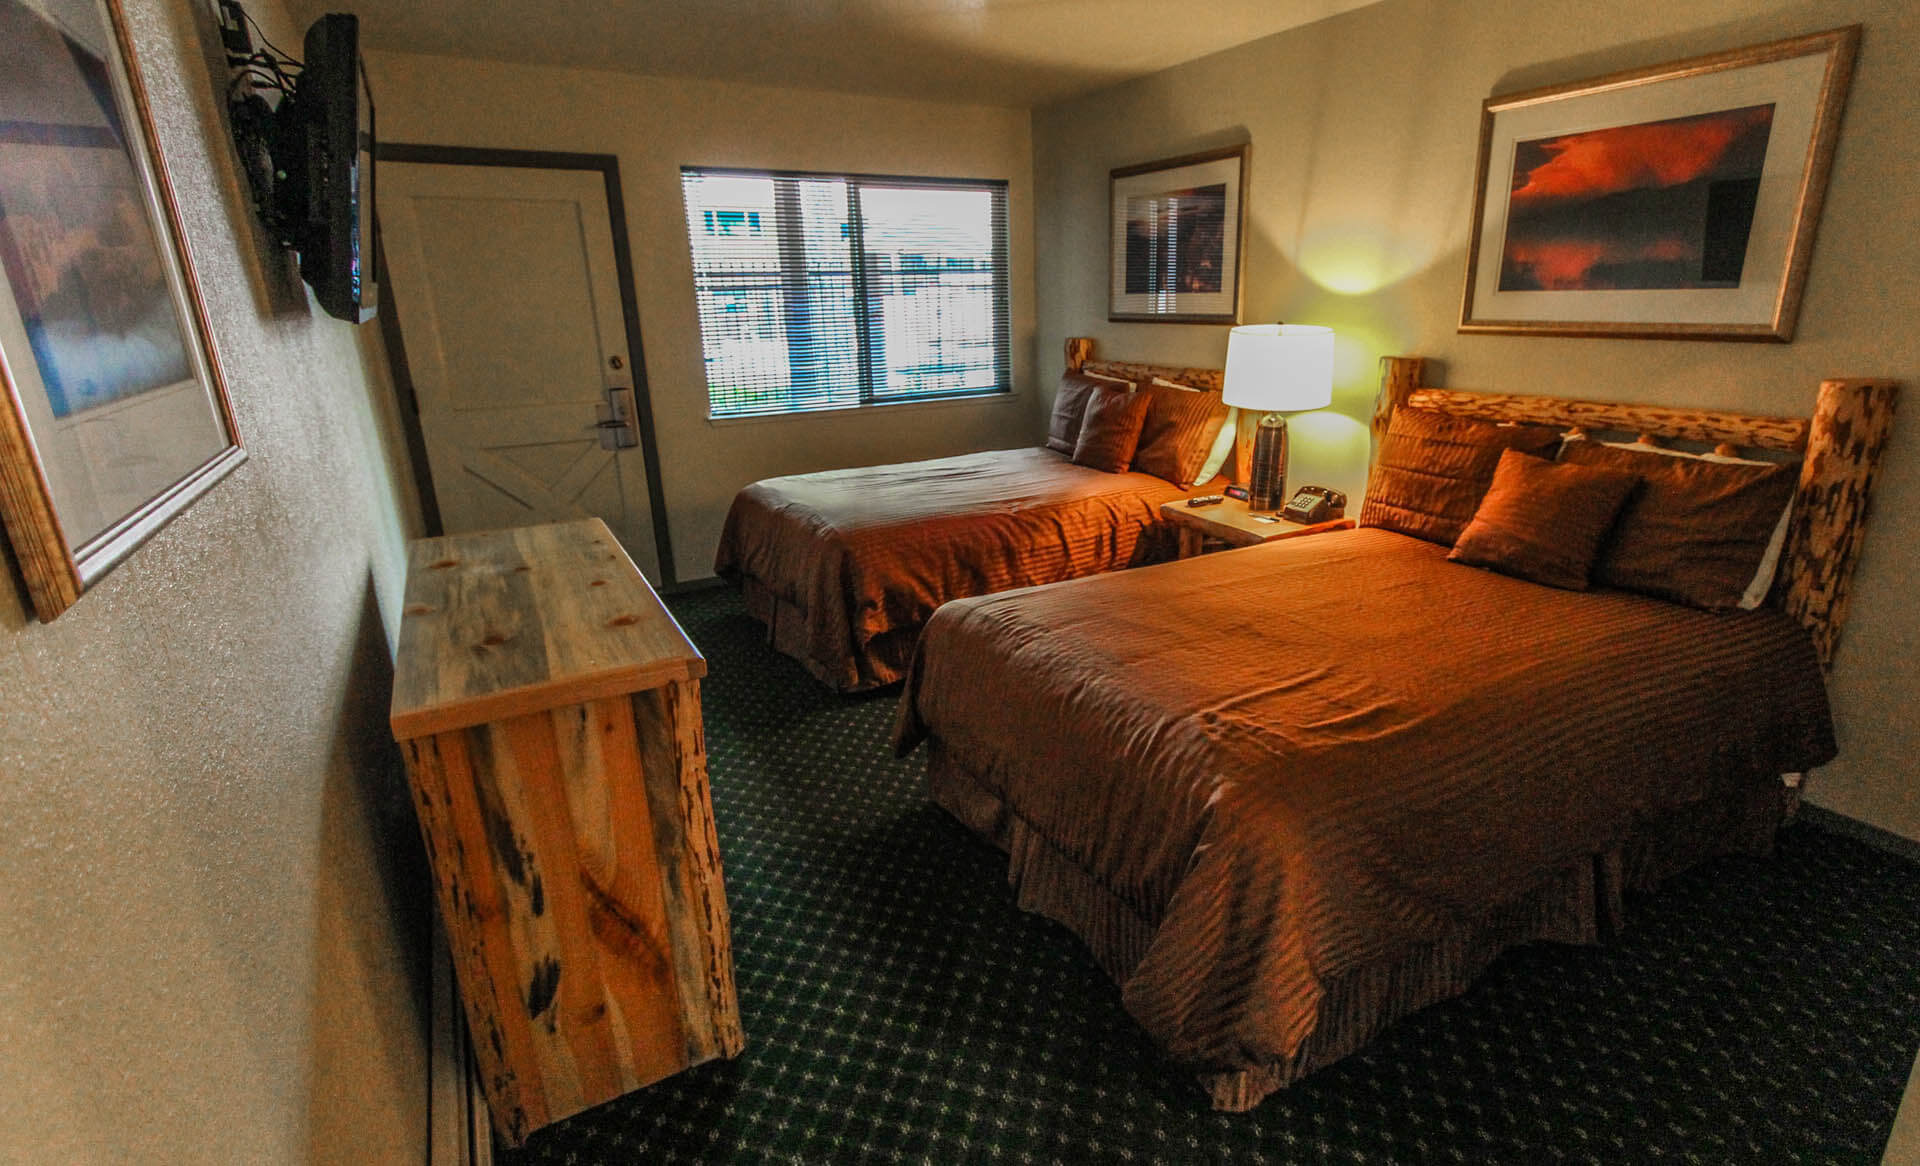 A spacious bedroom with double beds at VRI's The Lodge at Lake Tahoe in California.